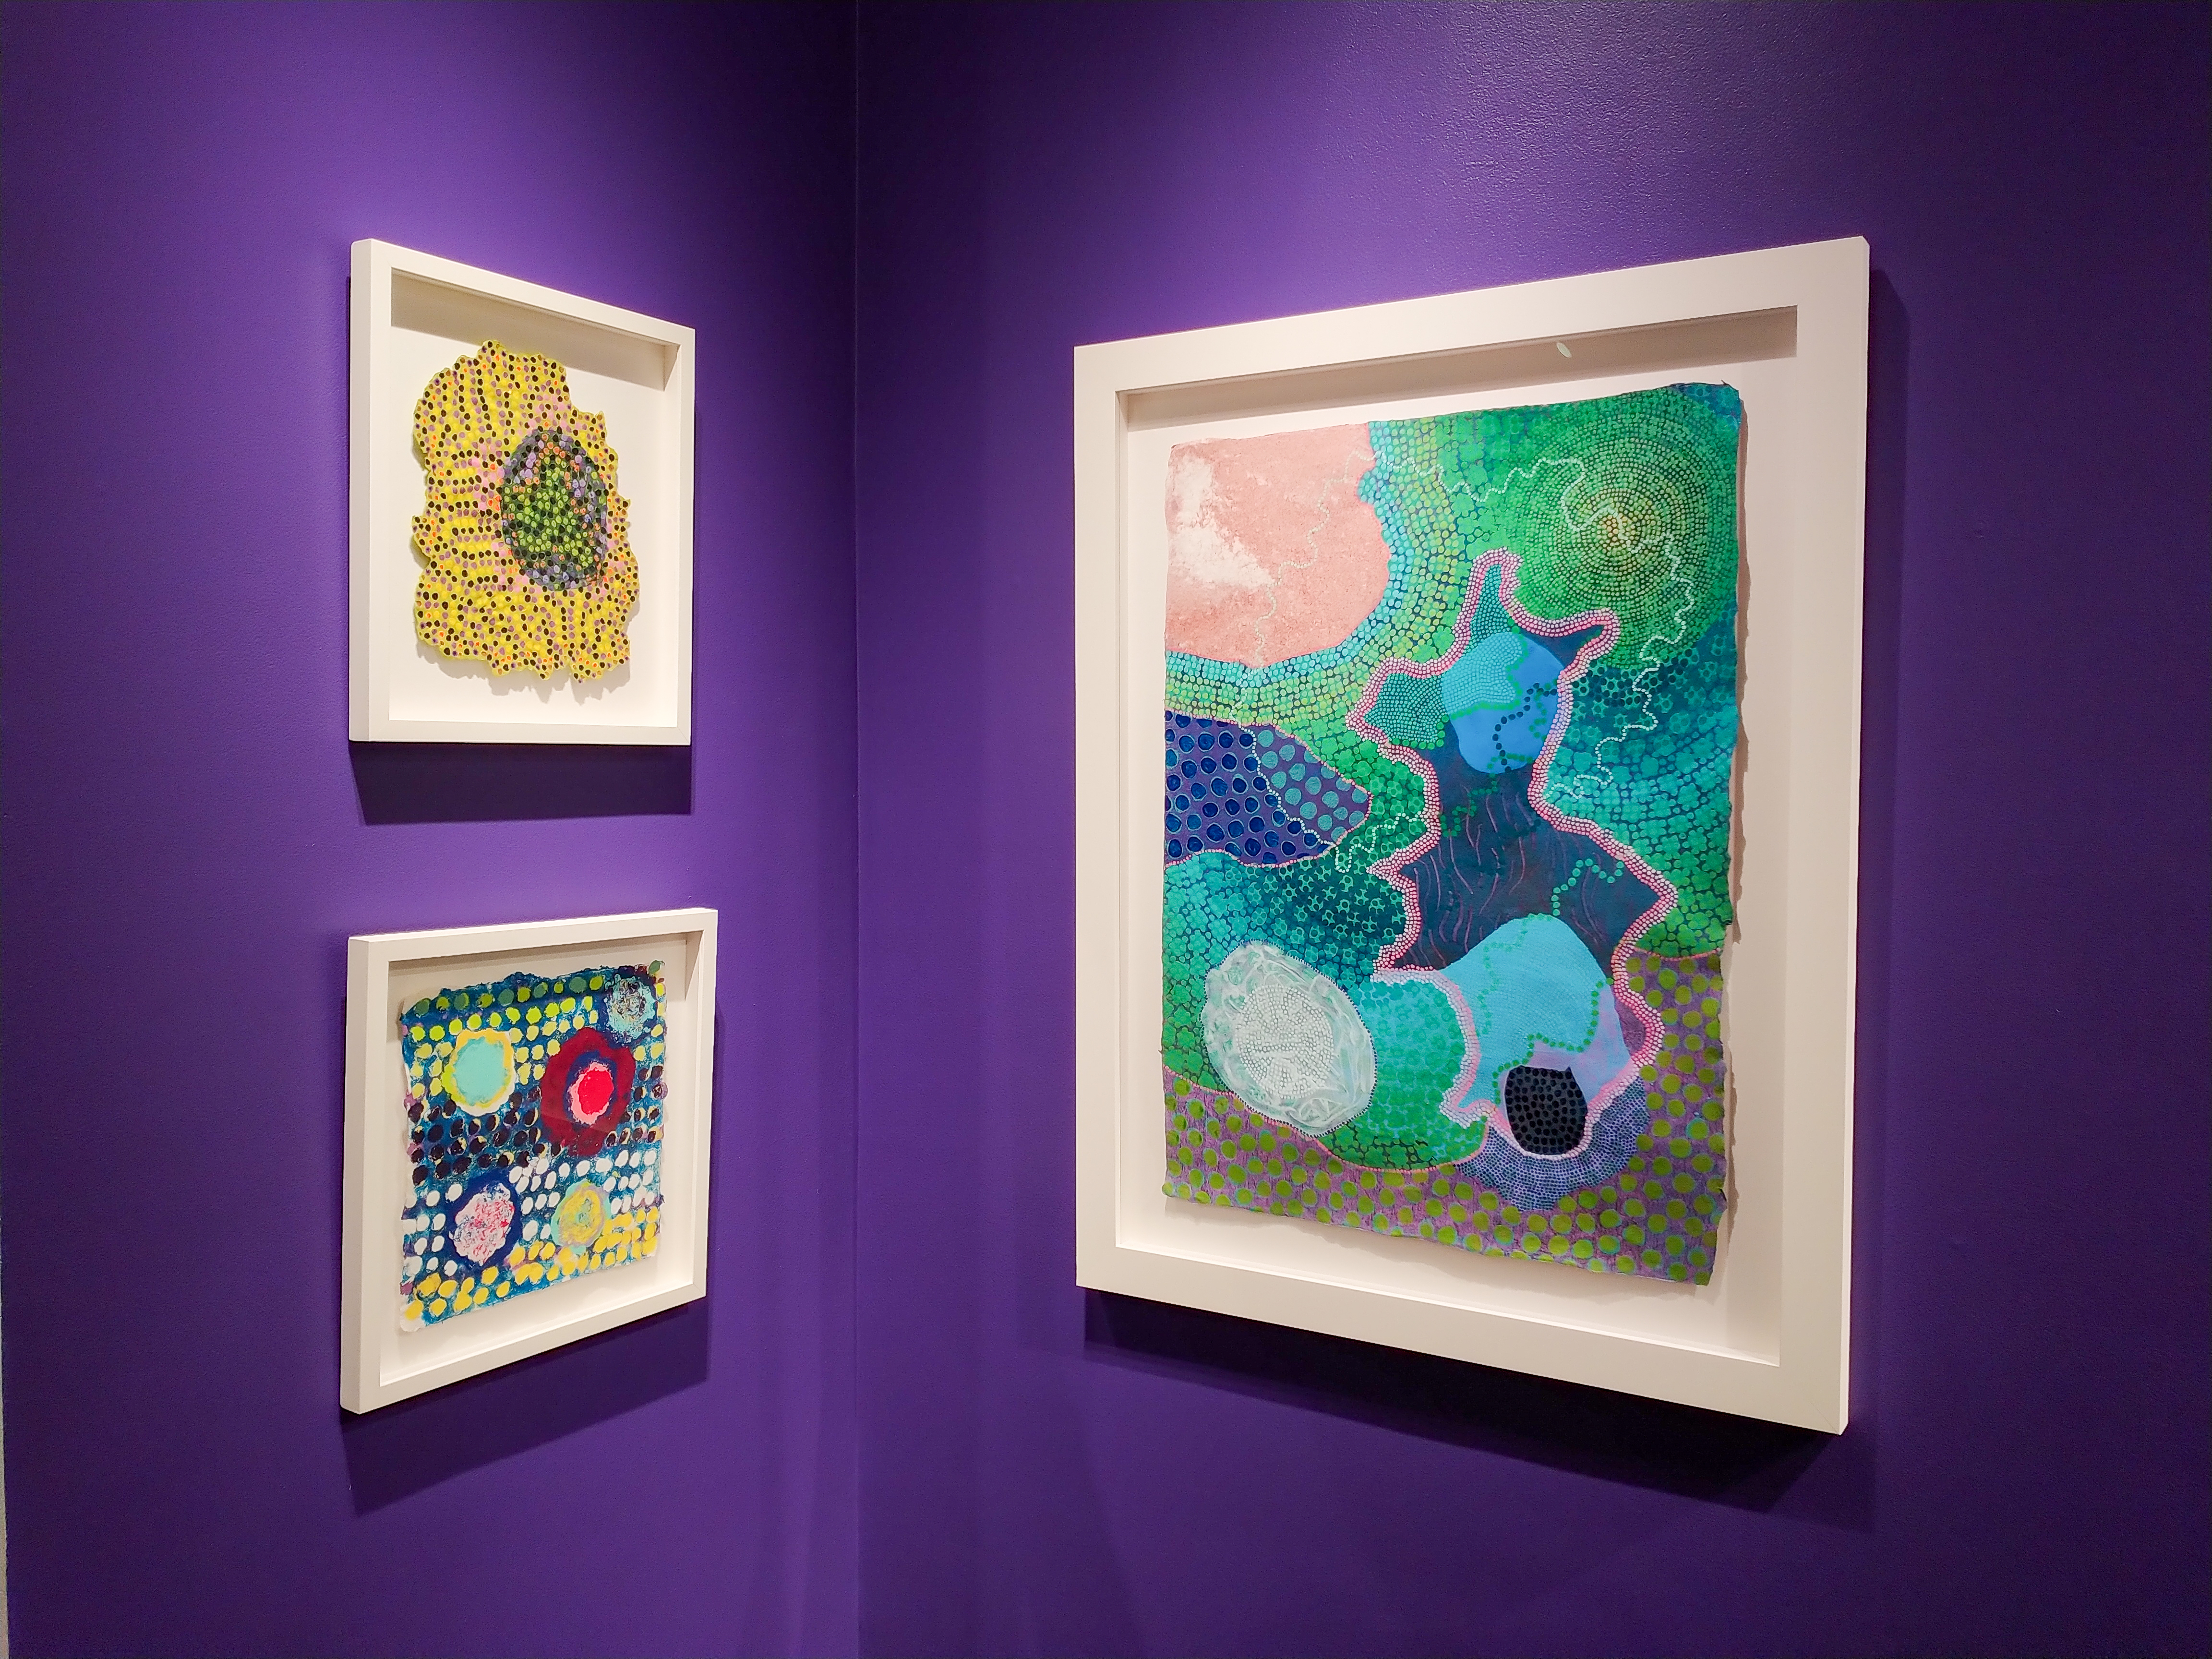 The accent corner of the gallery is painted purple and features three framed pieces by Chad Hayward. On the left wall of the corner, Cell, a yellow irregularly shaped paper is mounted to float in white frame. The yellow paper is dotted with lavender, purple and yellow paint. To the right side of the piece there is a purple circle  dotted with green, lavender, and orange that looks like the nucleus of a cell.  Mounted just bellow the Cell artwork is a small Untitled square piece. It is a blue sheet with horizontal stripes created from repeated dots . There is a stripe of yellow, a stripe of dark purple, white, and another stripe of yellow. On top of the stripes sit five large circles, one that is turquoise rimmed in yellow, another is red rimmed in pink and then rimmed in red again, the third is white with mottled bits of red and blue in its interior, the fourth is turquoise with a yellow donut in the center and the last is a mottled turquoise and purple circle. On the right wall of the corner is a piece titled Oligodendrocyte. It is primarily shades of blue and green with pink and white accents. The over all impression is that of looking at a map. 